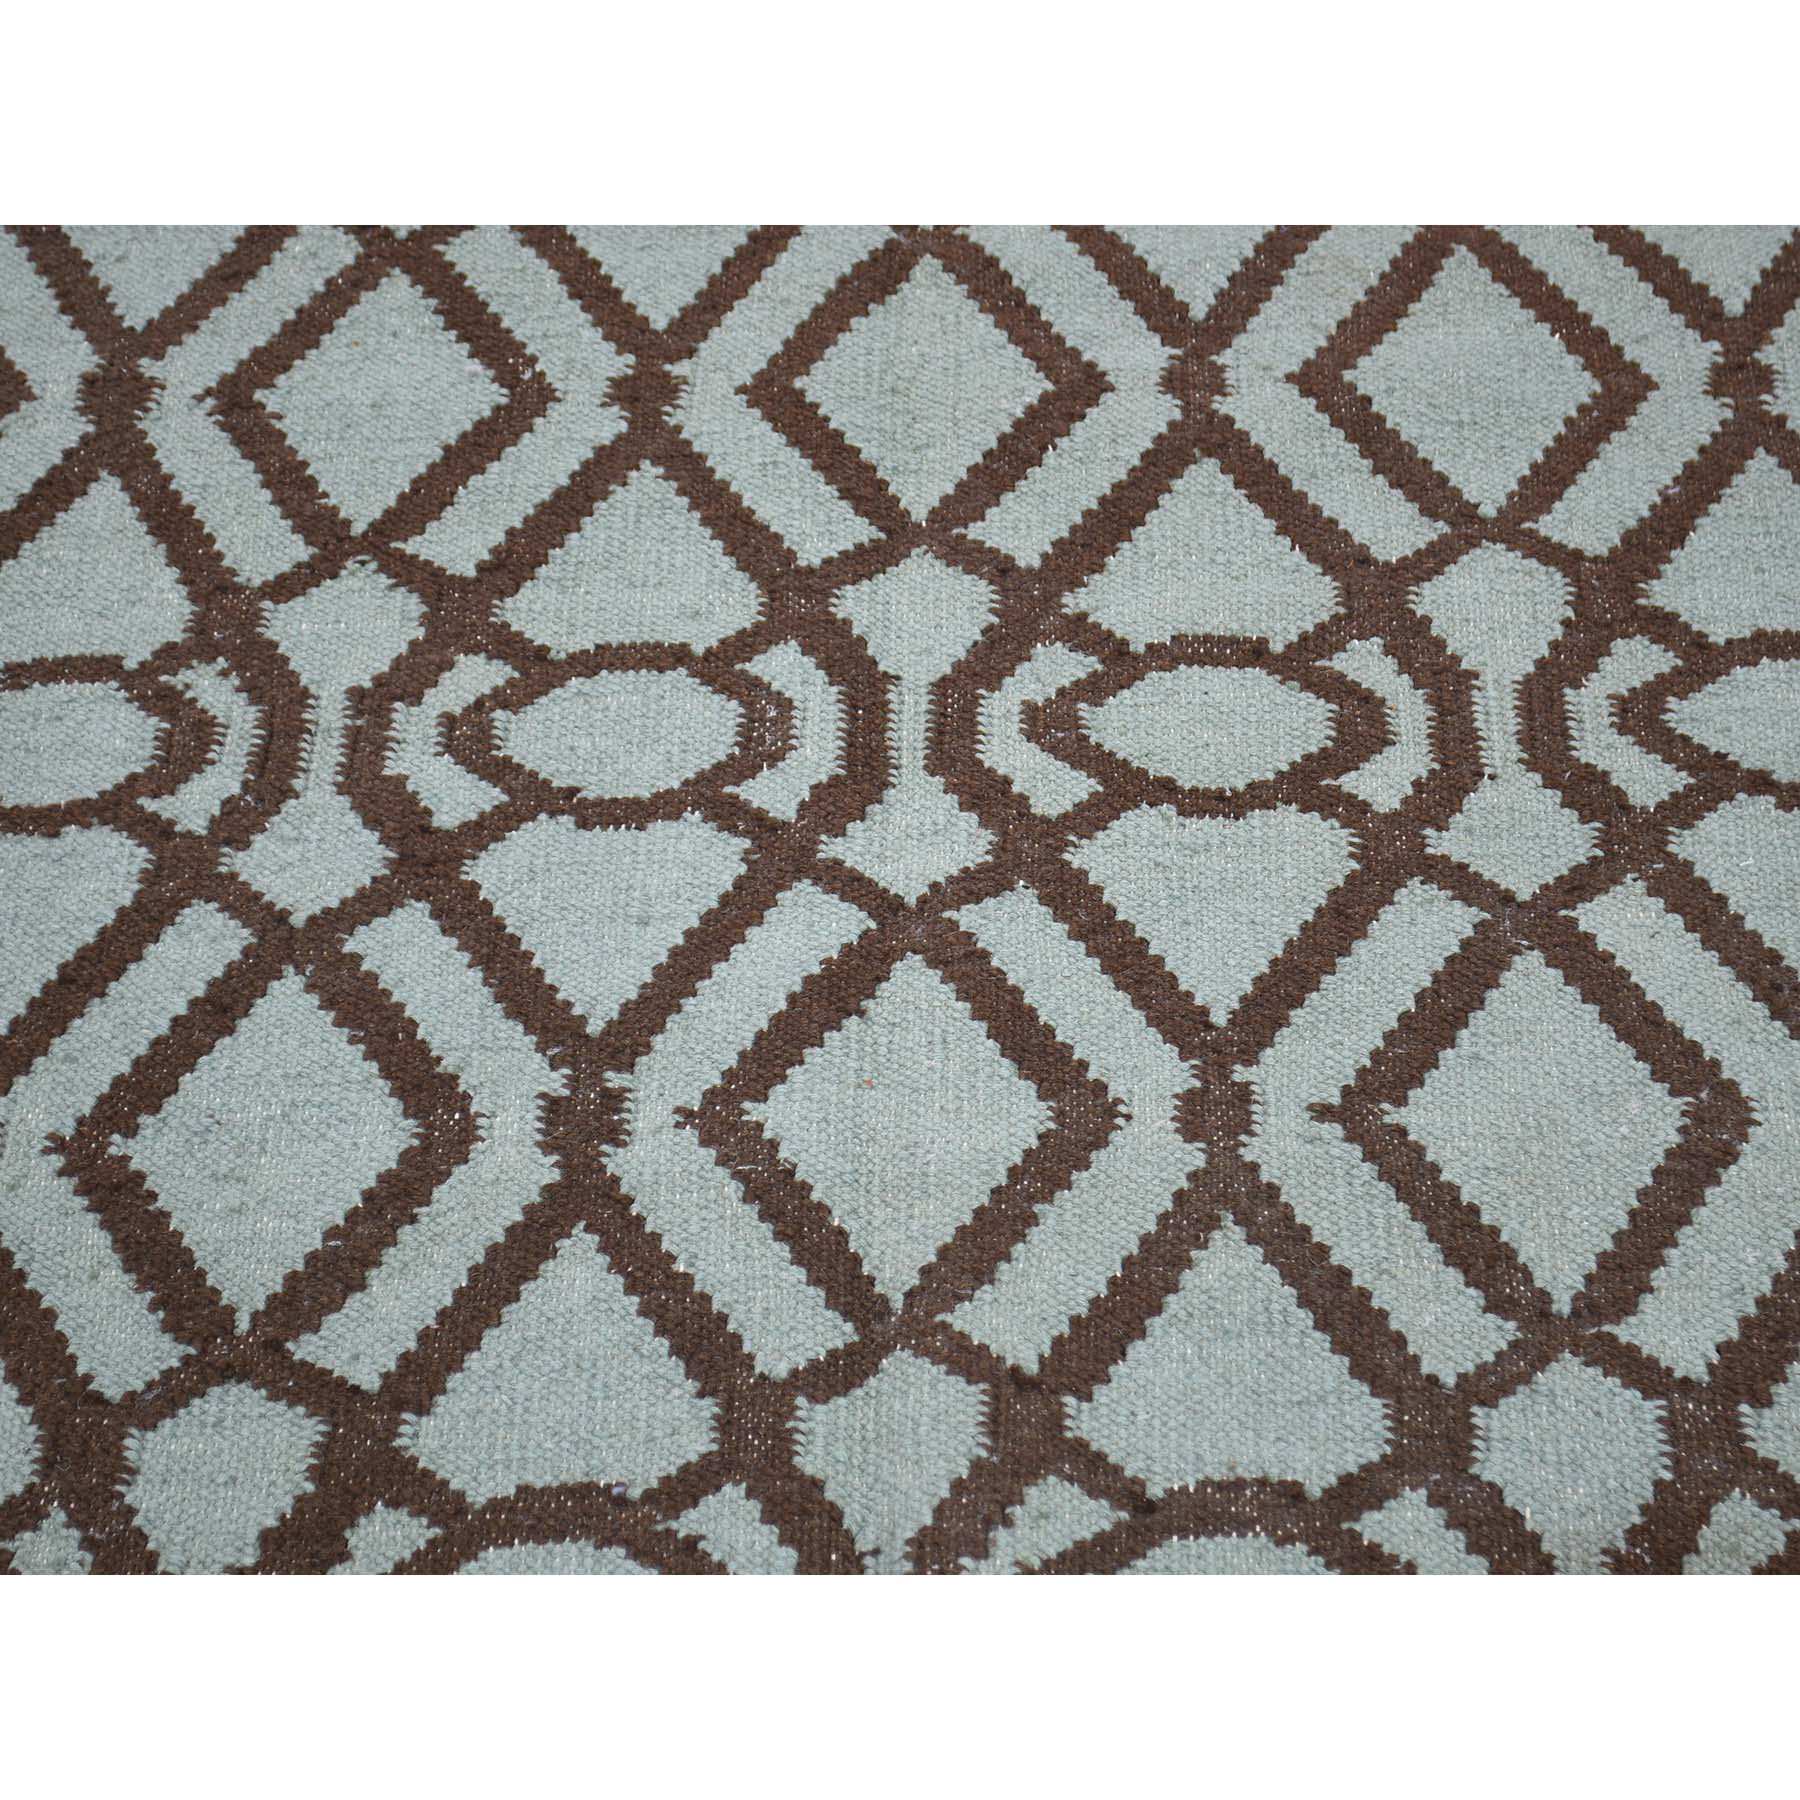 4'3''x5'10'' Hand Woven Light Green Durie Kilim Reversible Flat Weave Rug 